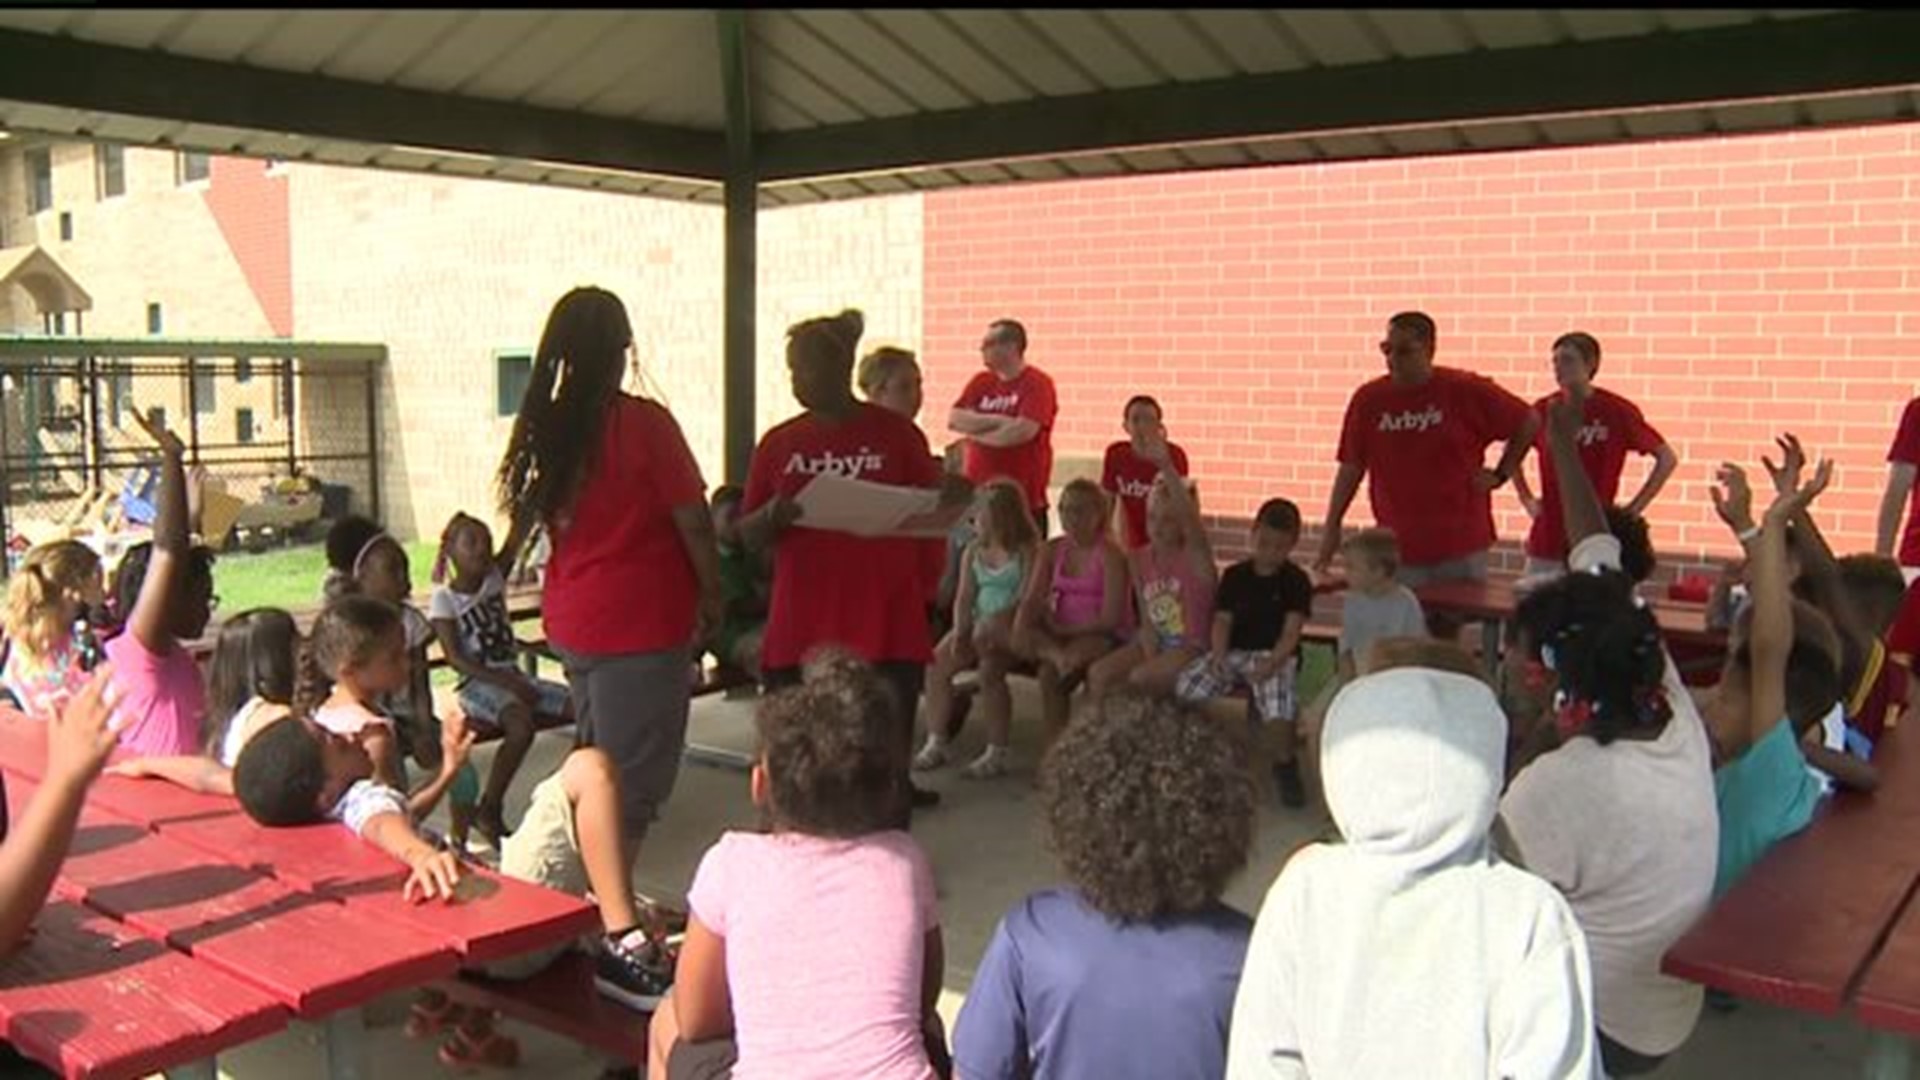 Friendly House summer meal program comes to a close